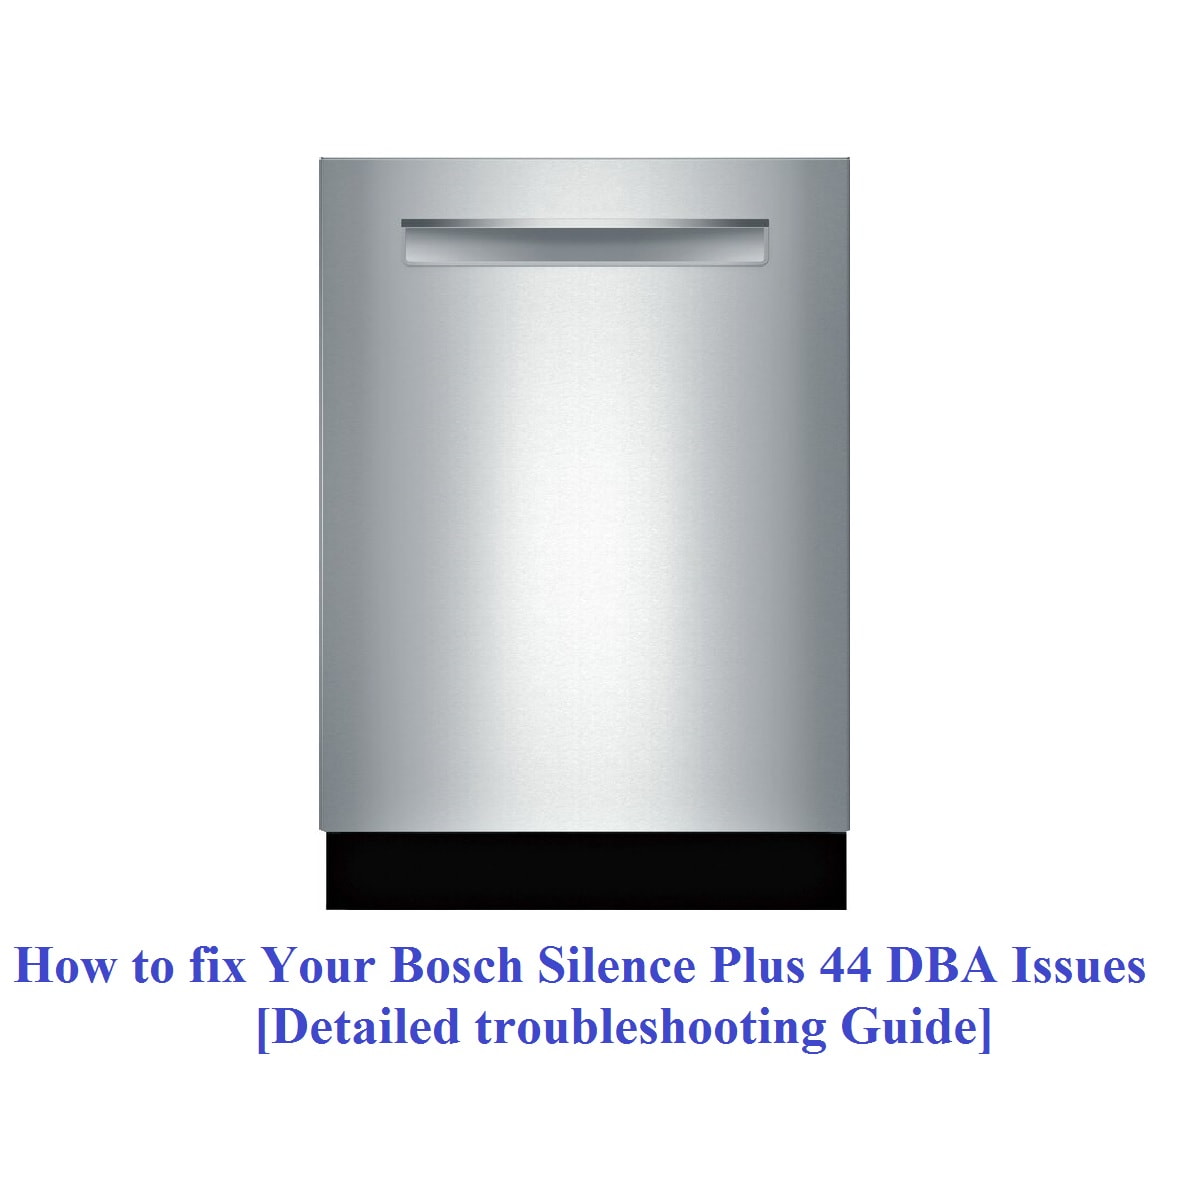 How to fix Your Bosch Silence Plus 44 DBA Issues [Detailed troubleshooting Guide]